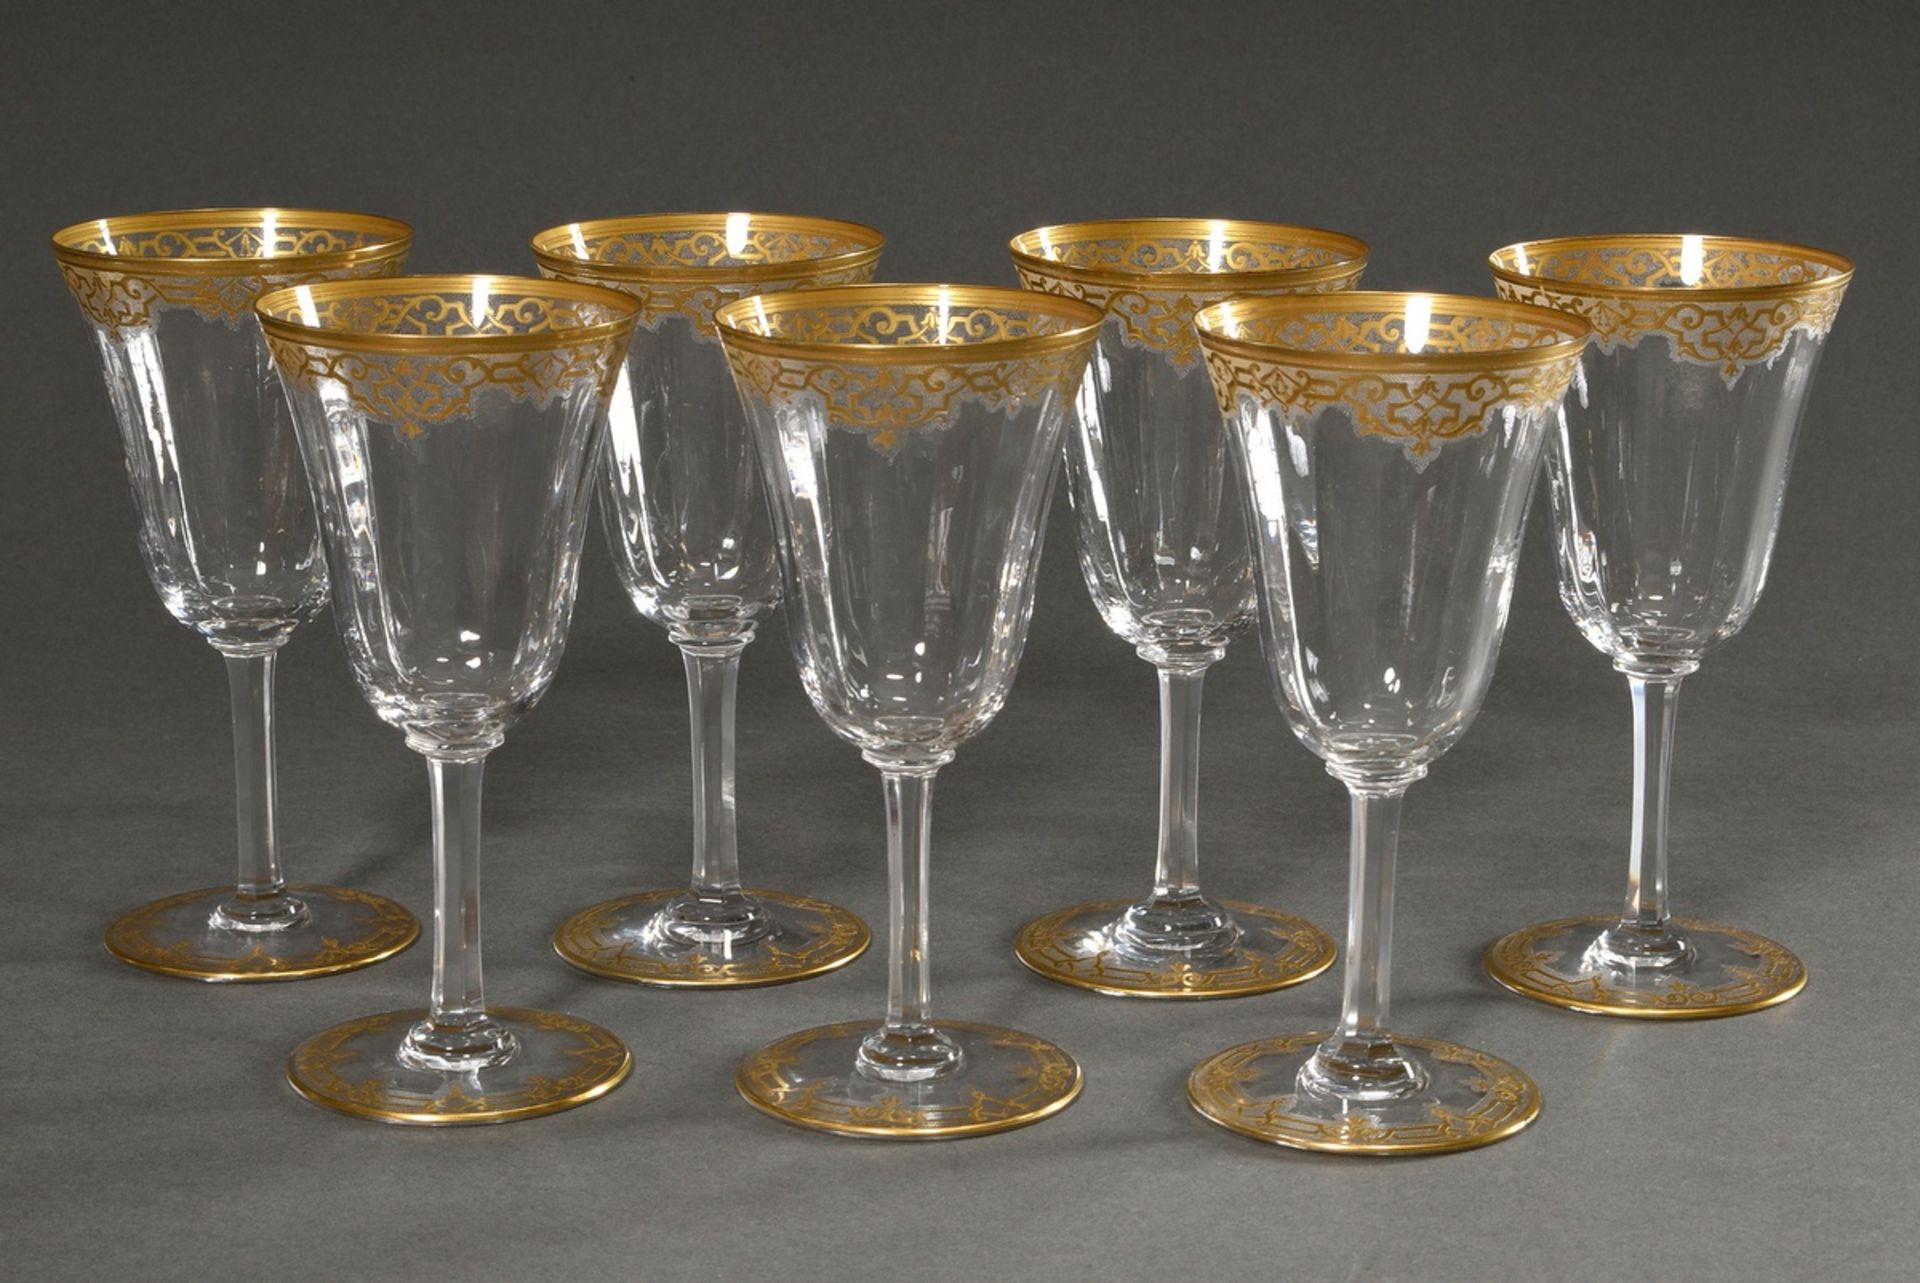 7 glasses with ornamental gold rim in Saint Louis style, h. 17.5cm